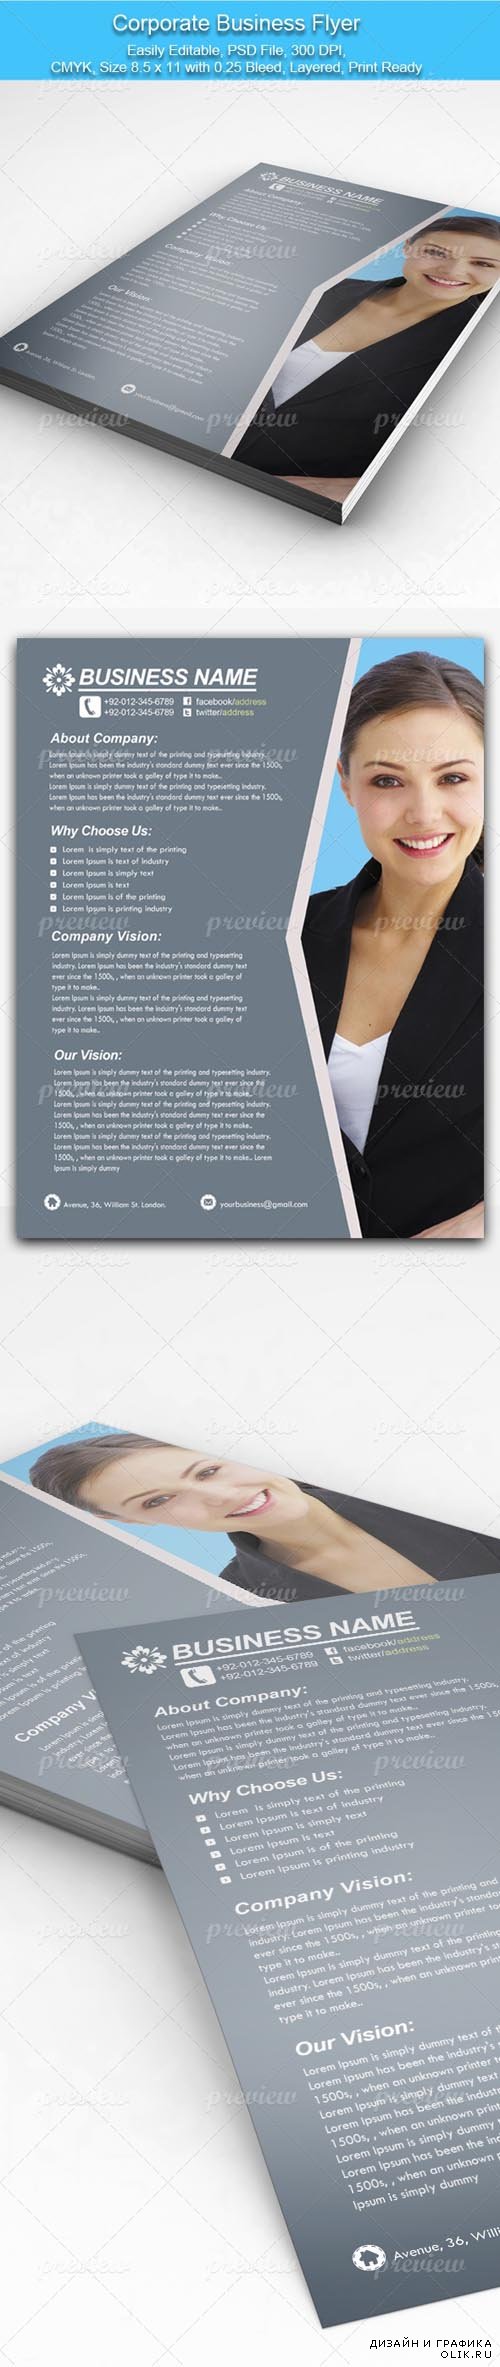 PSD - Corporate Business Flyer 2806